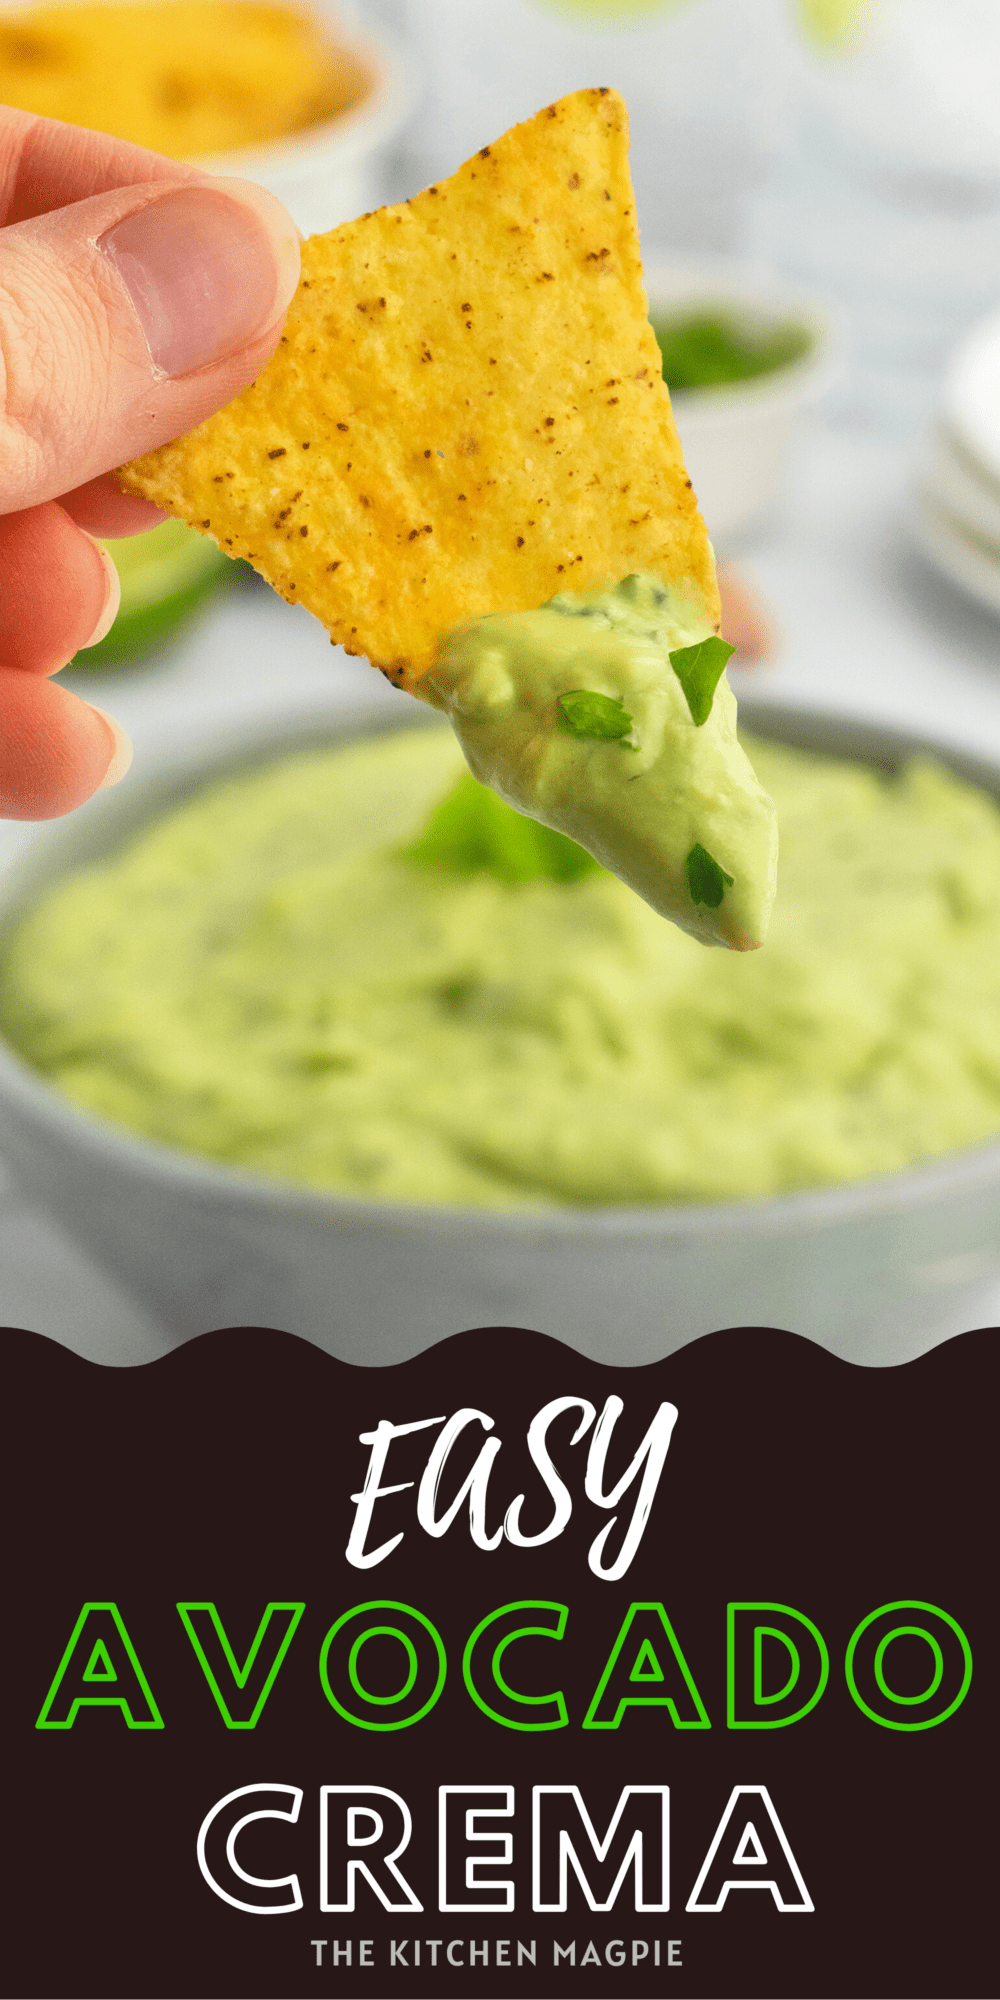 Delicious and easy avocado crema is perfect for topping your tacos, nachos or simply using as a dip for your chips! Using the best fresh ingredients really make this shine!